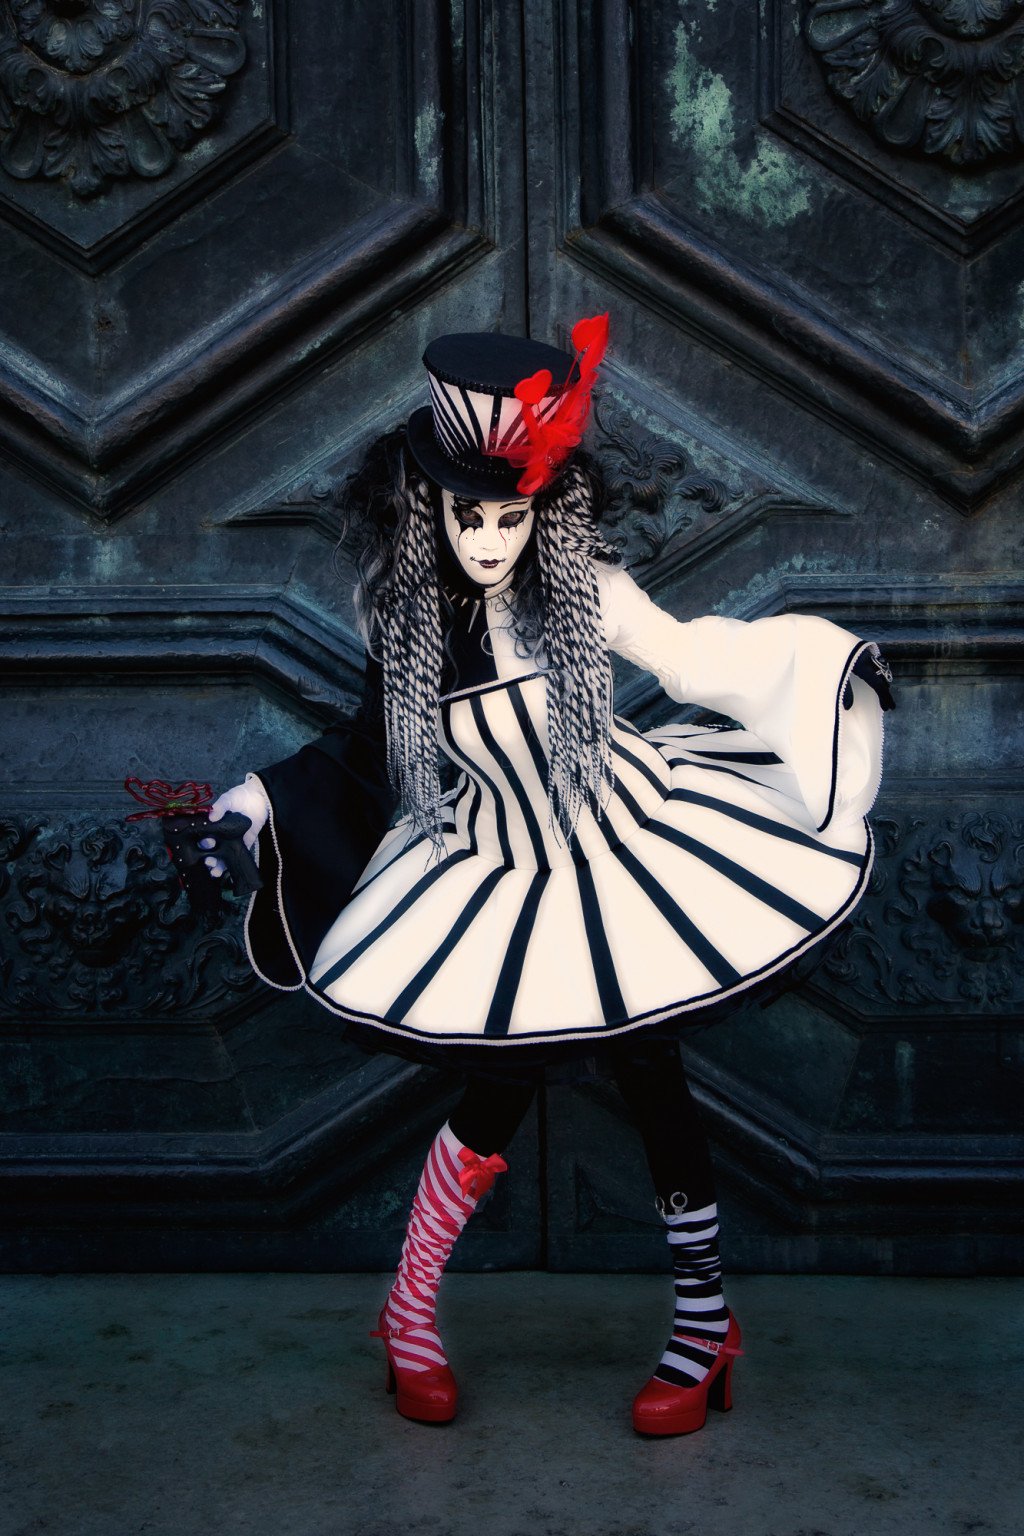 Carnival model in black, white and red in front of a church door